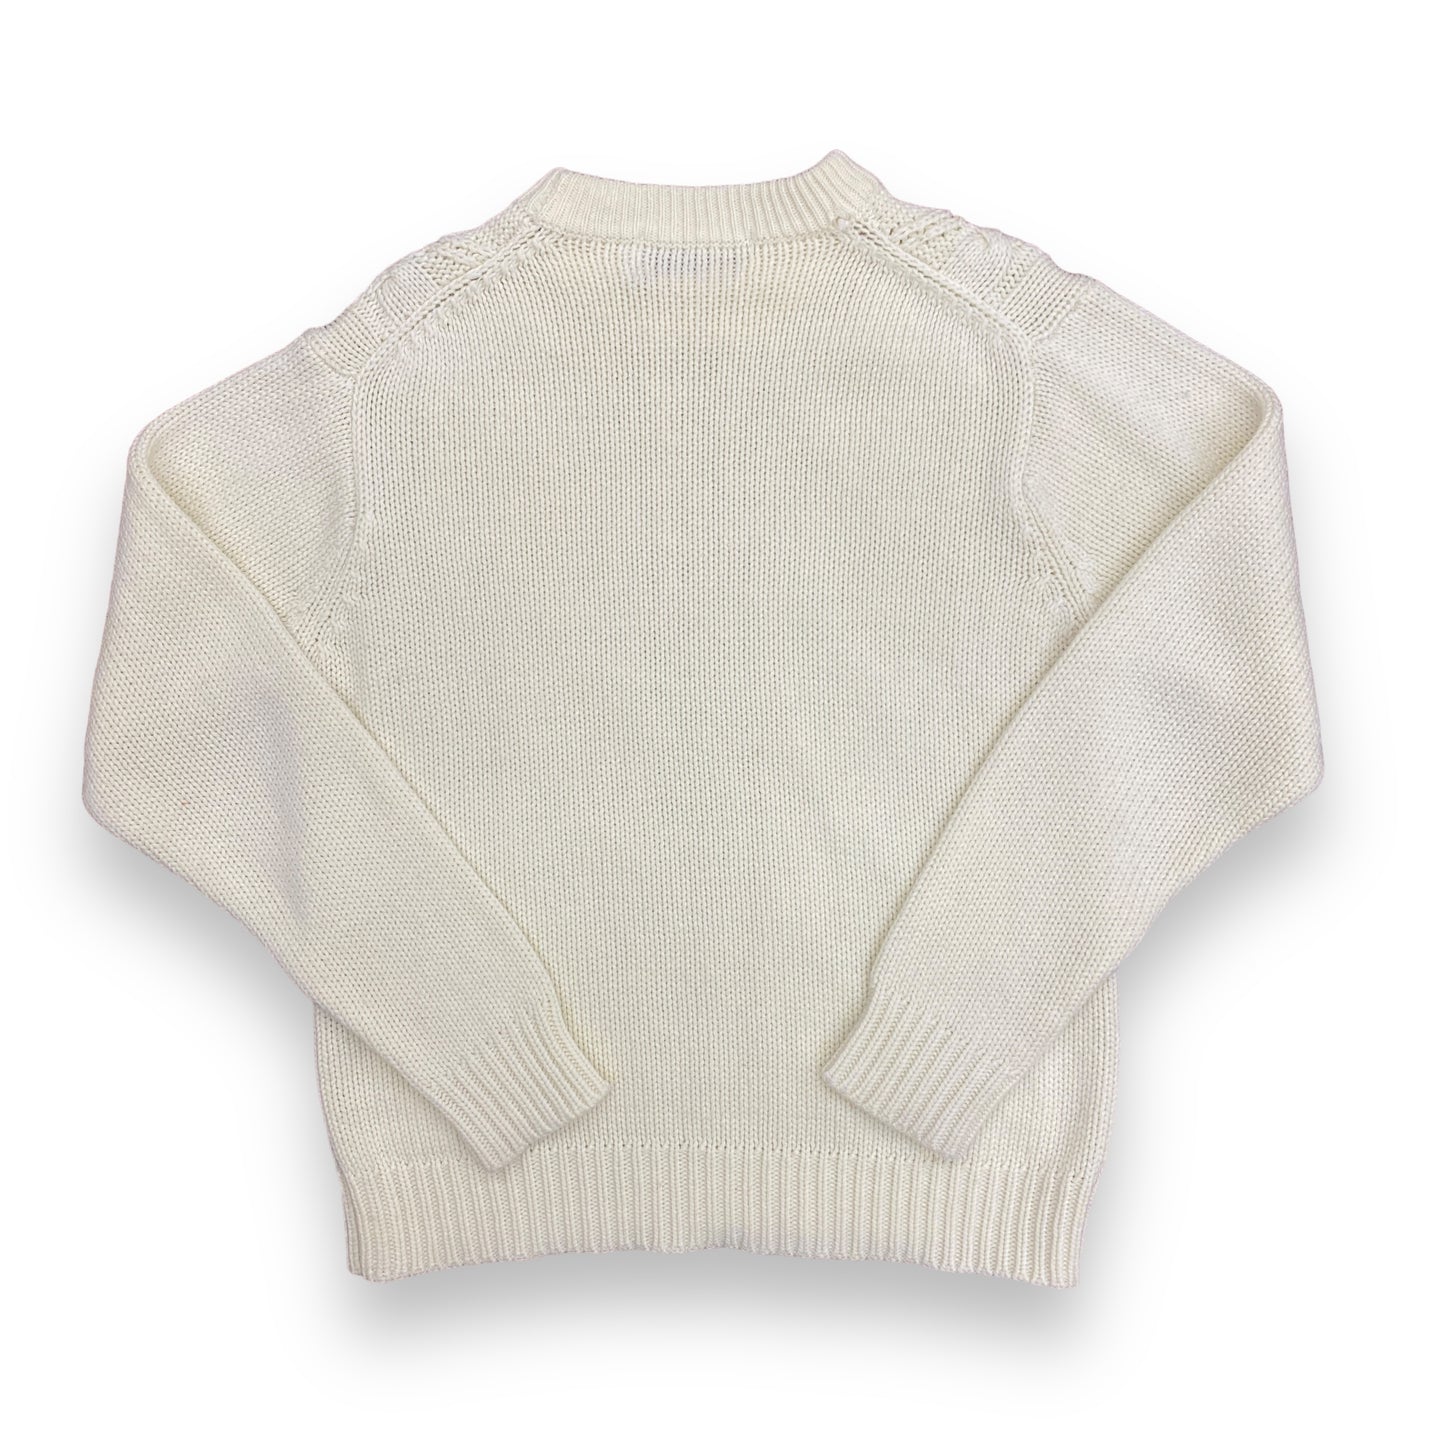 Vintage 1980s Cream Fisherman Cable Knit Sweater - Size Medium